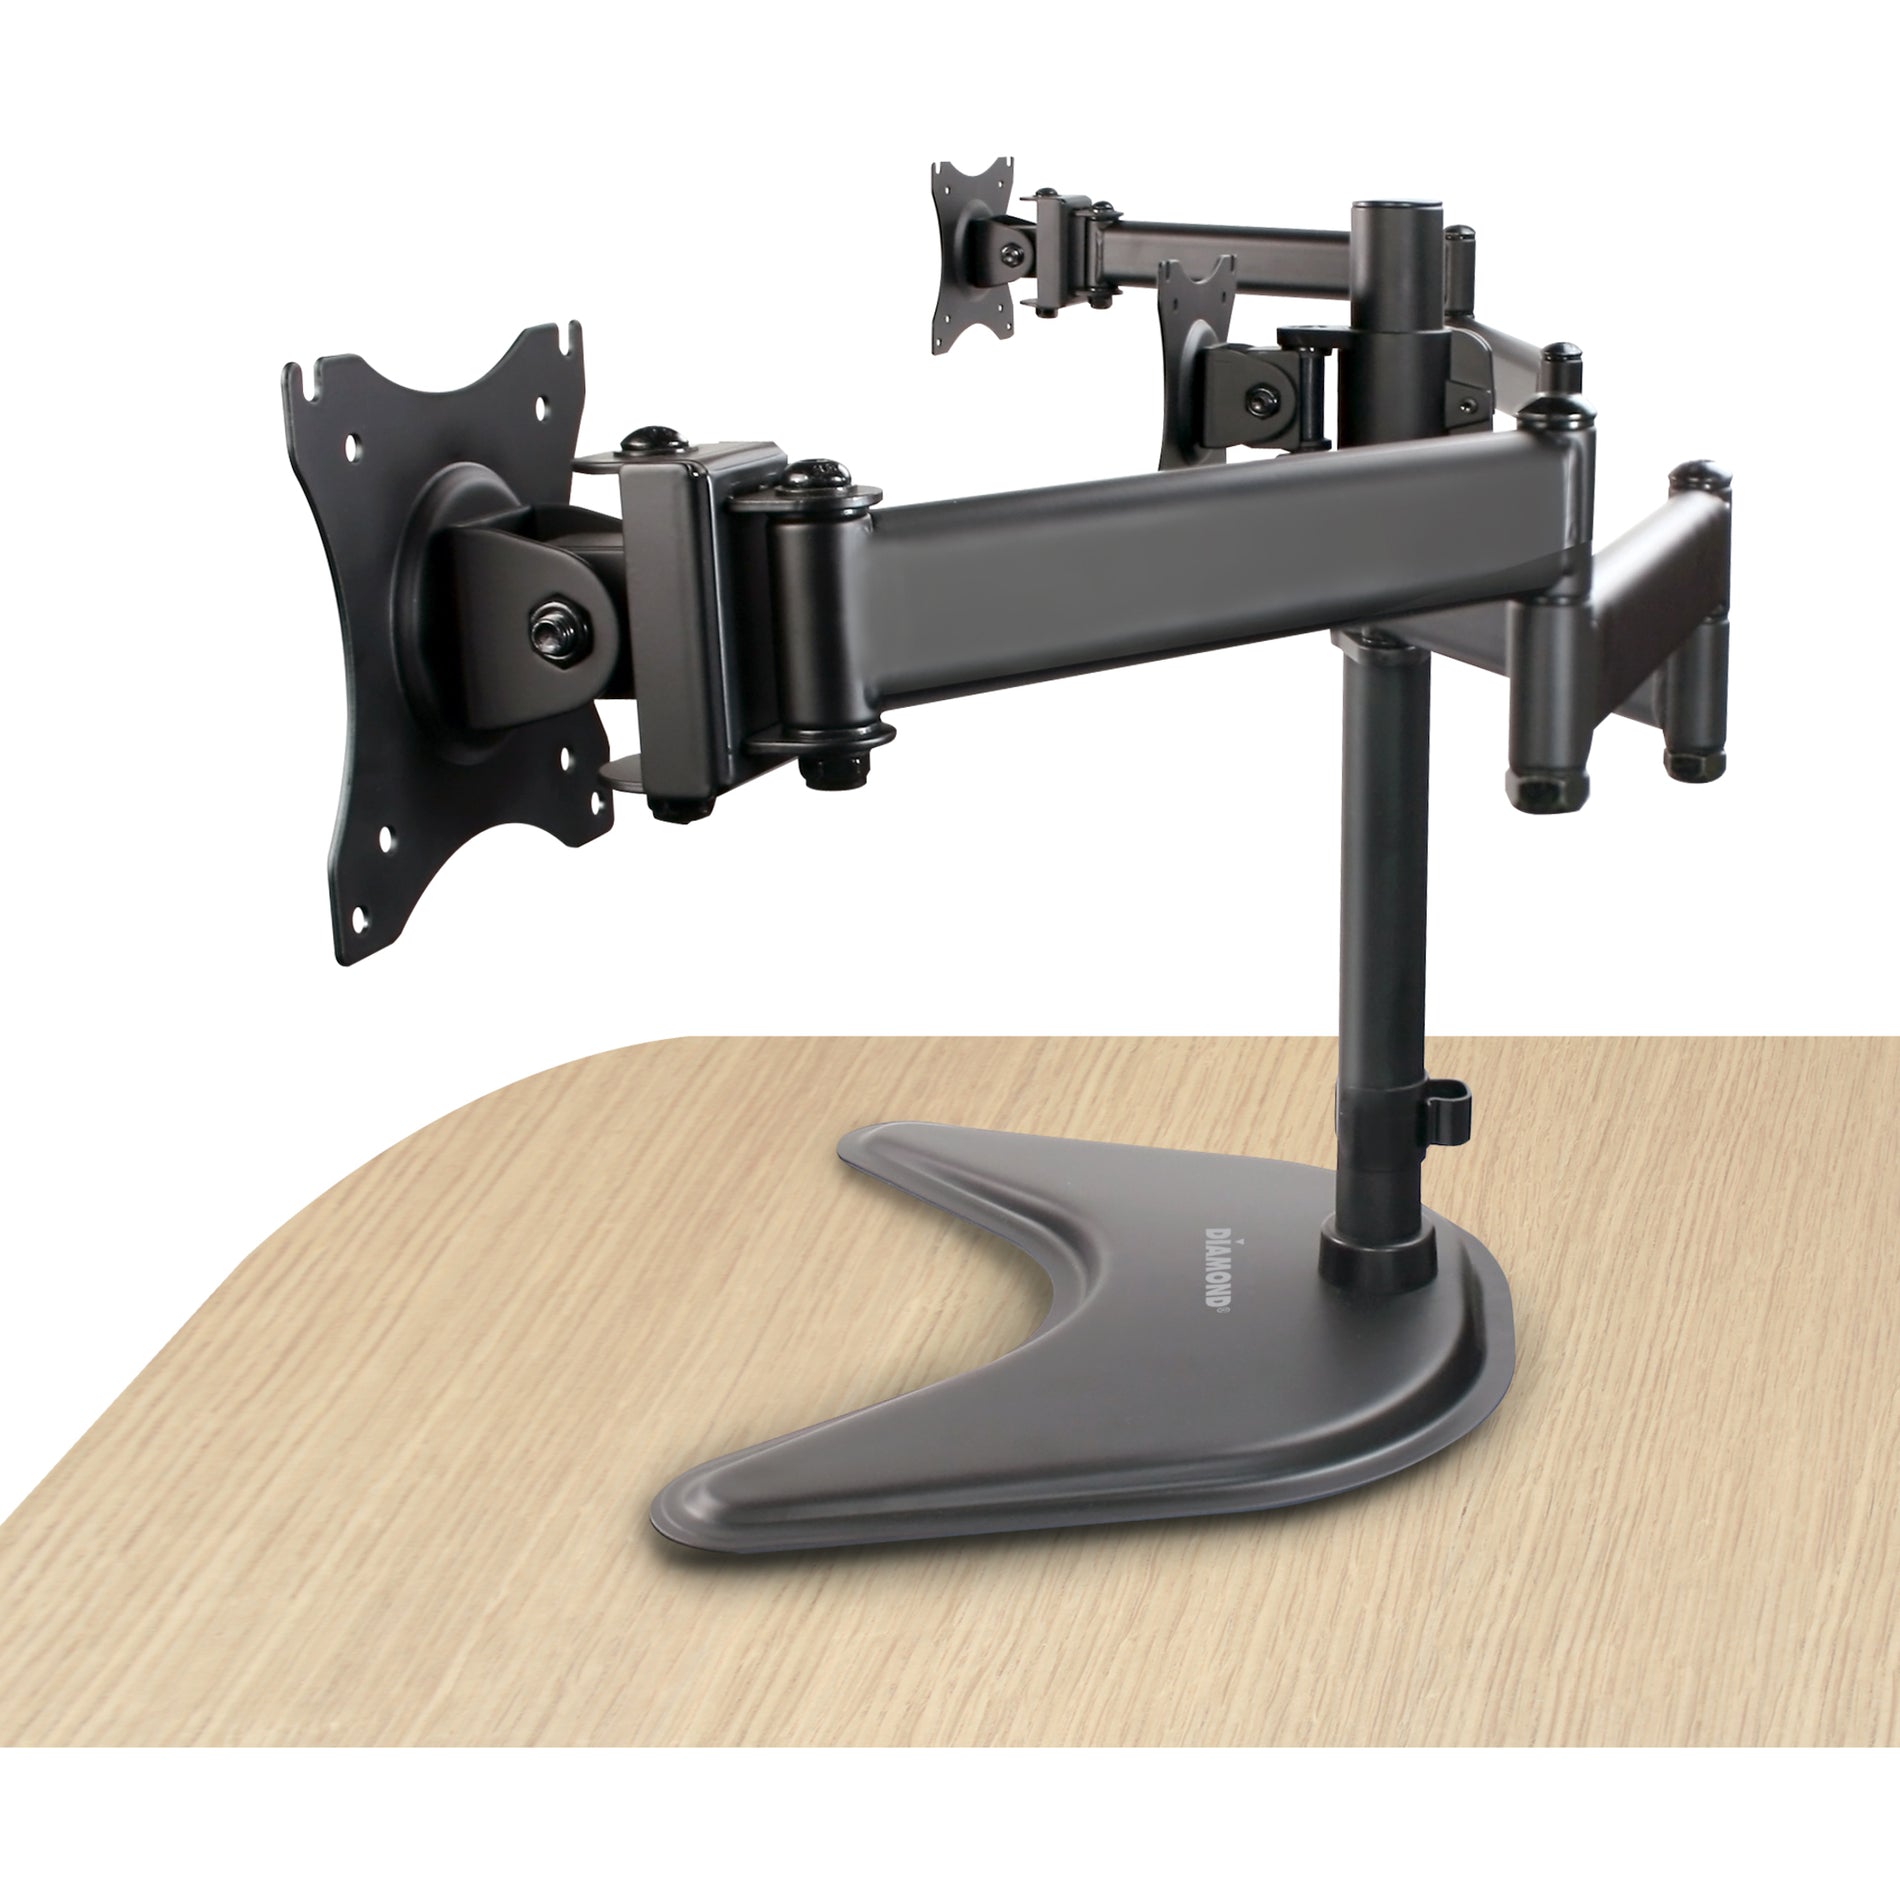 DIAMOND DMTA310 Ergonomic Articulating Triple Arm Display Table Top Mount, 360° Swivel, Cable Management, Height Adjustable [Discontinued]